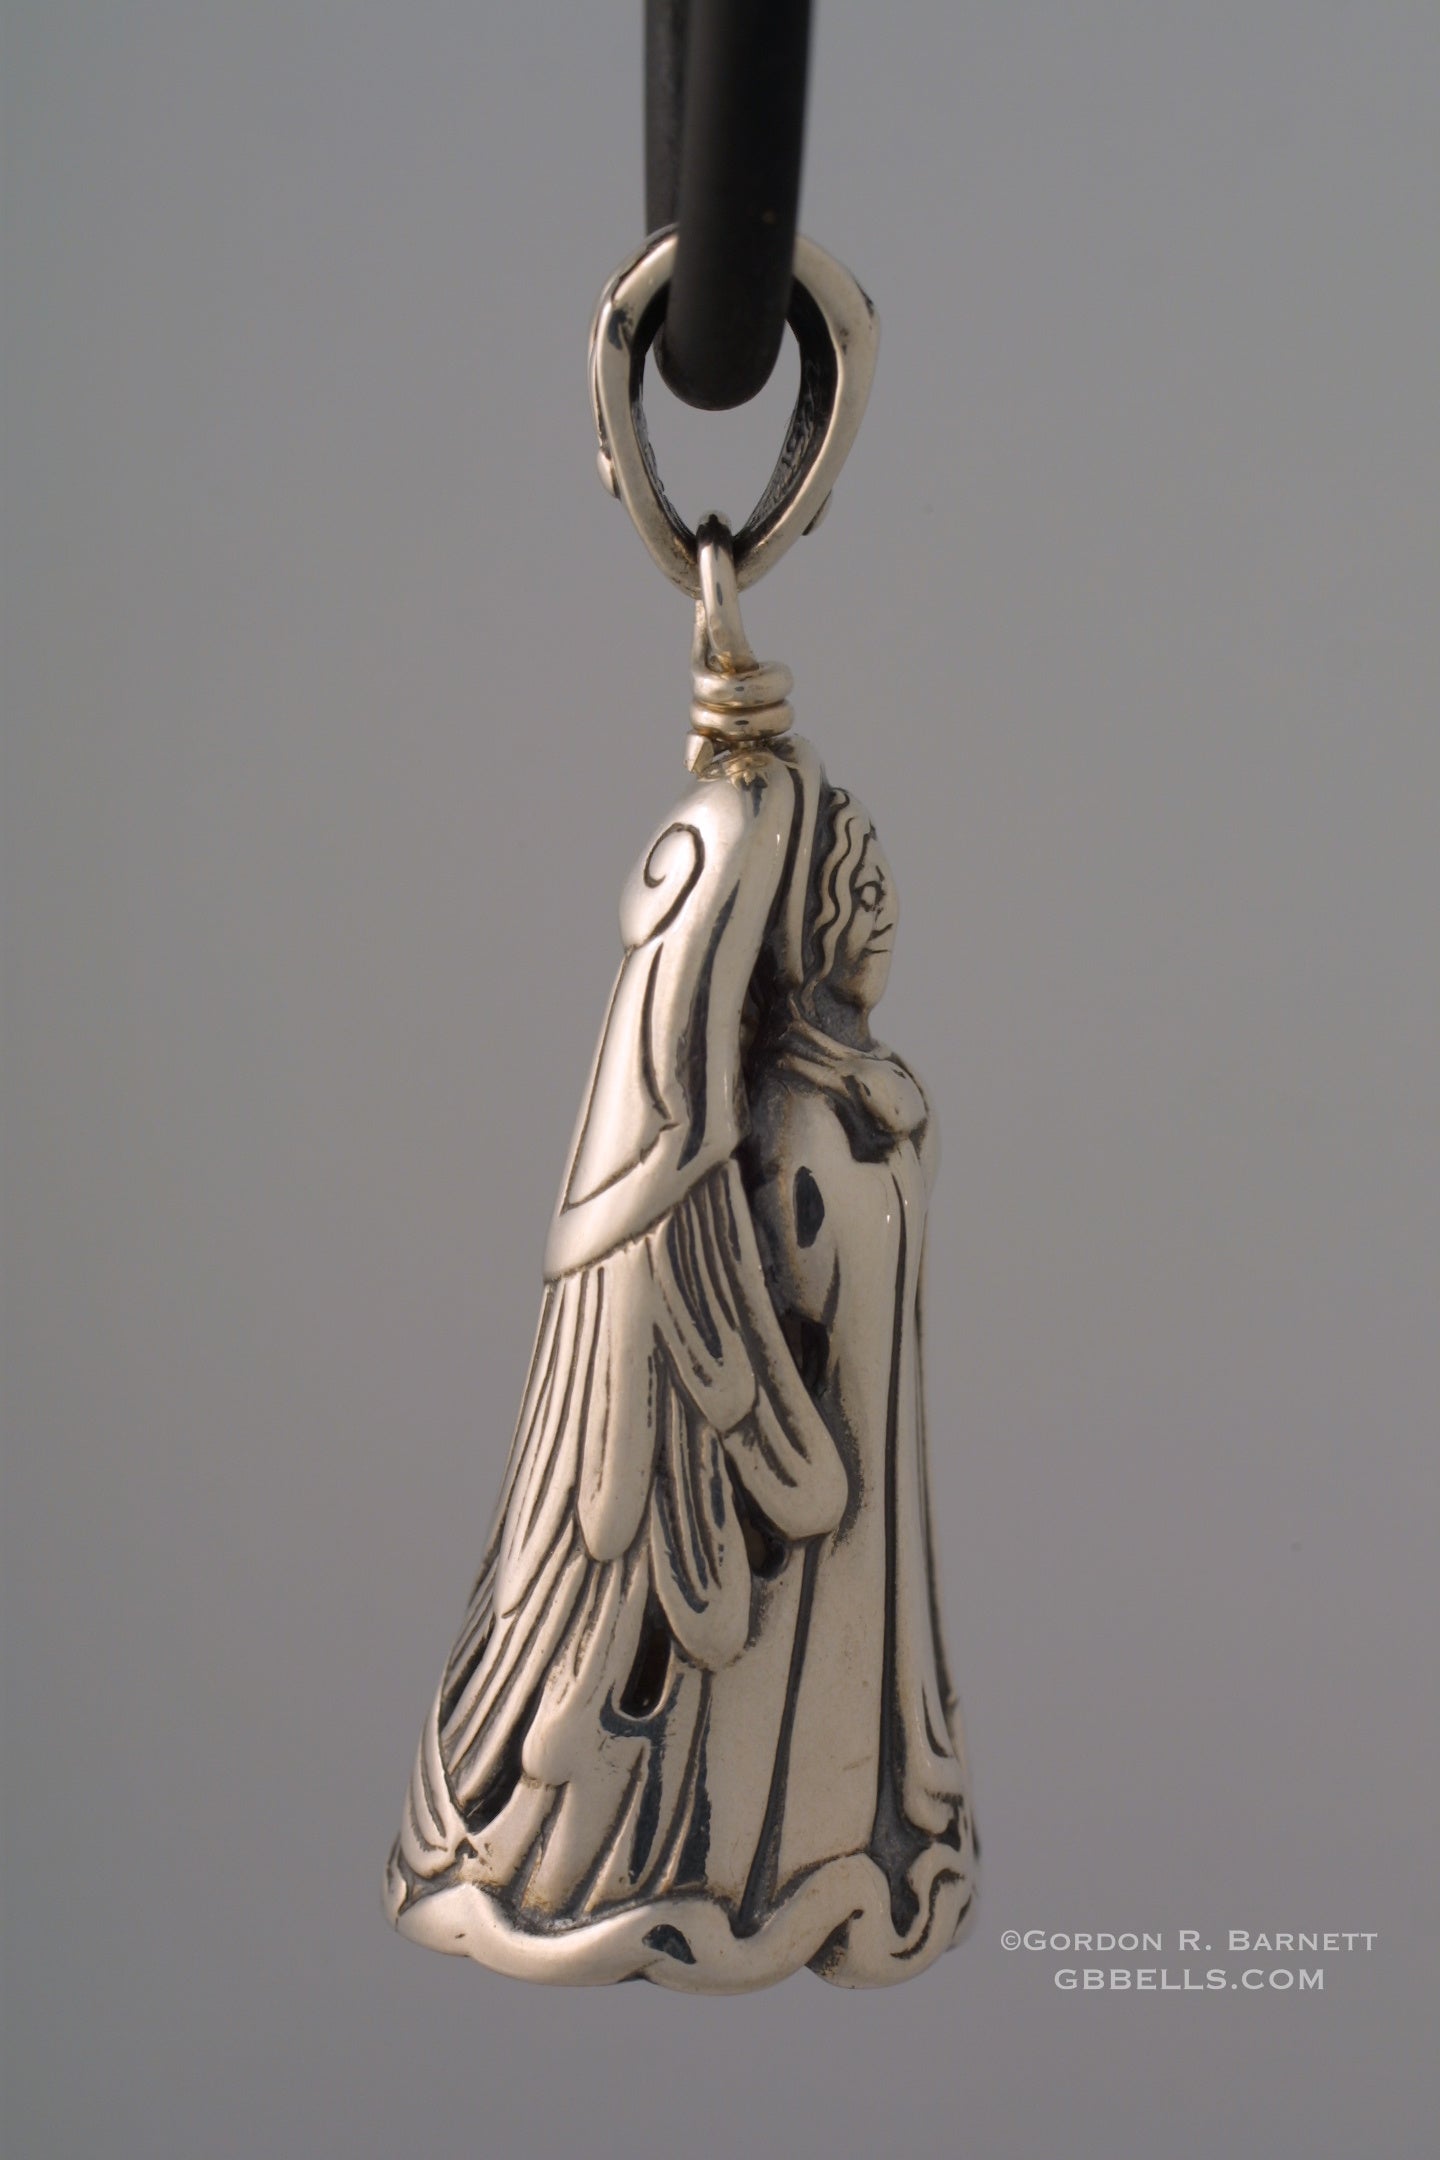 original angel in sterling silver by grbbells.com